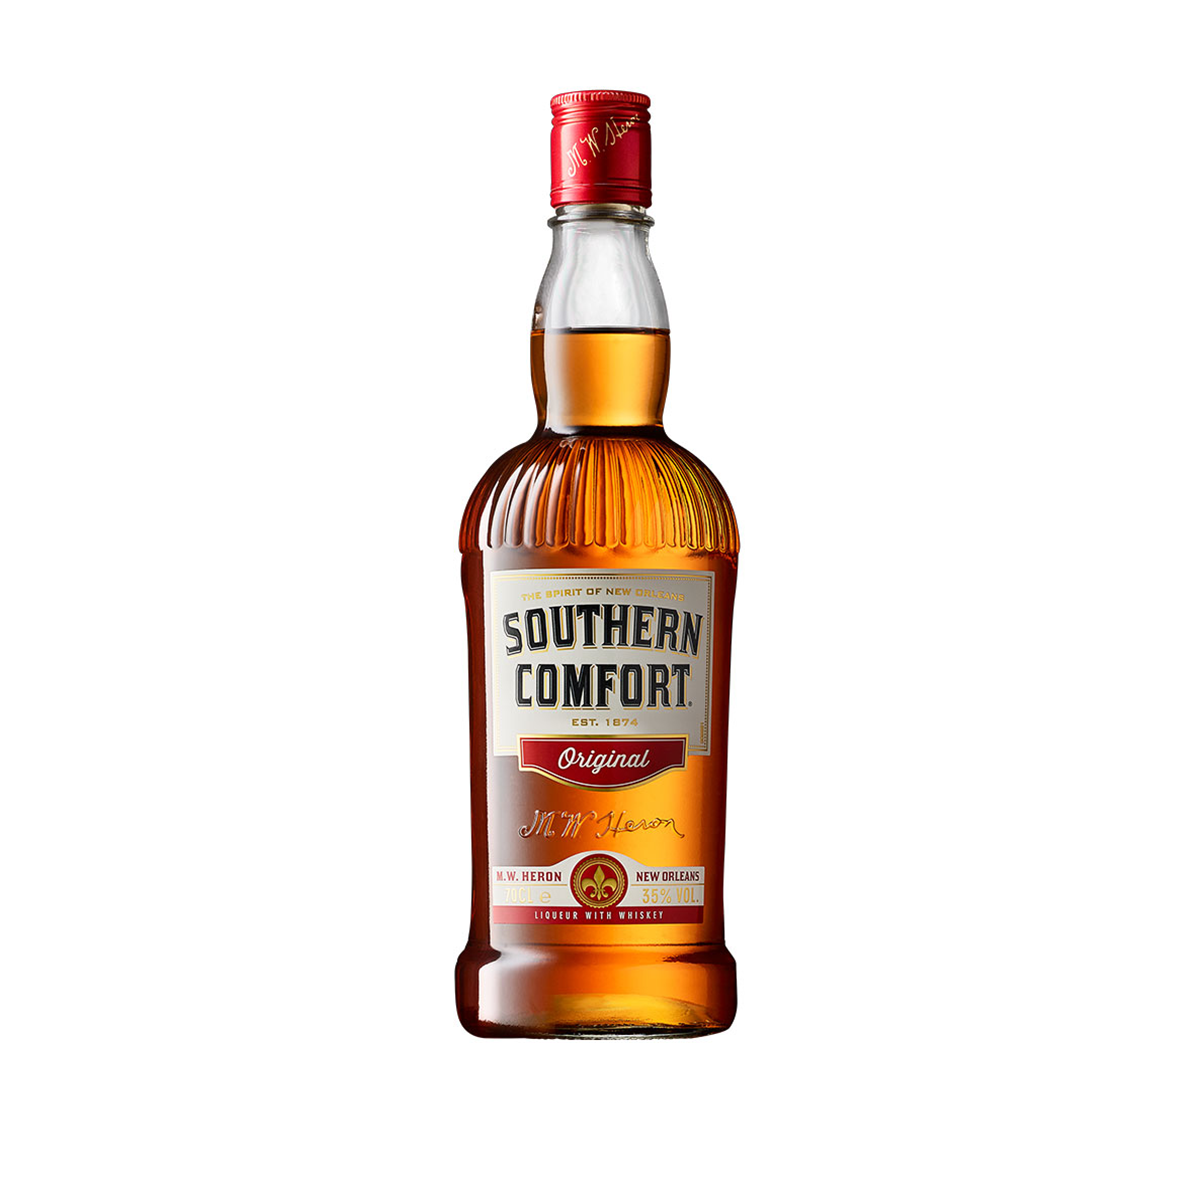 Southern comfort 0.7L